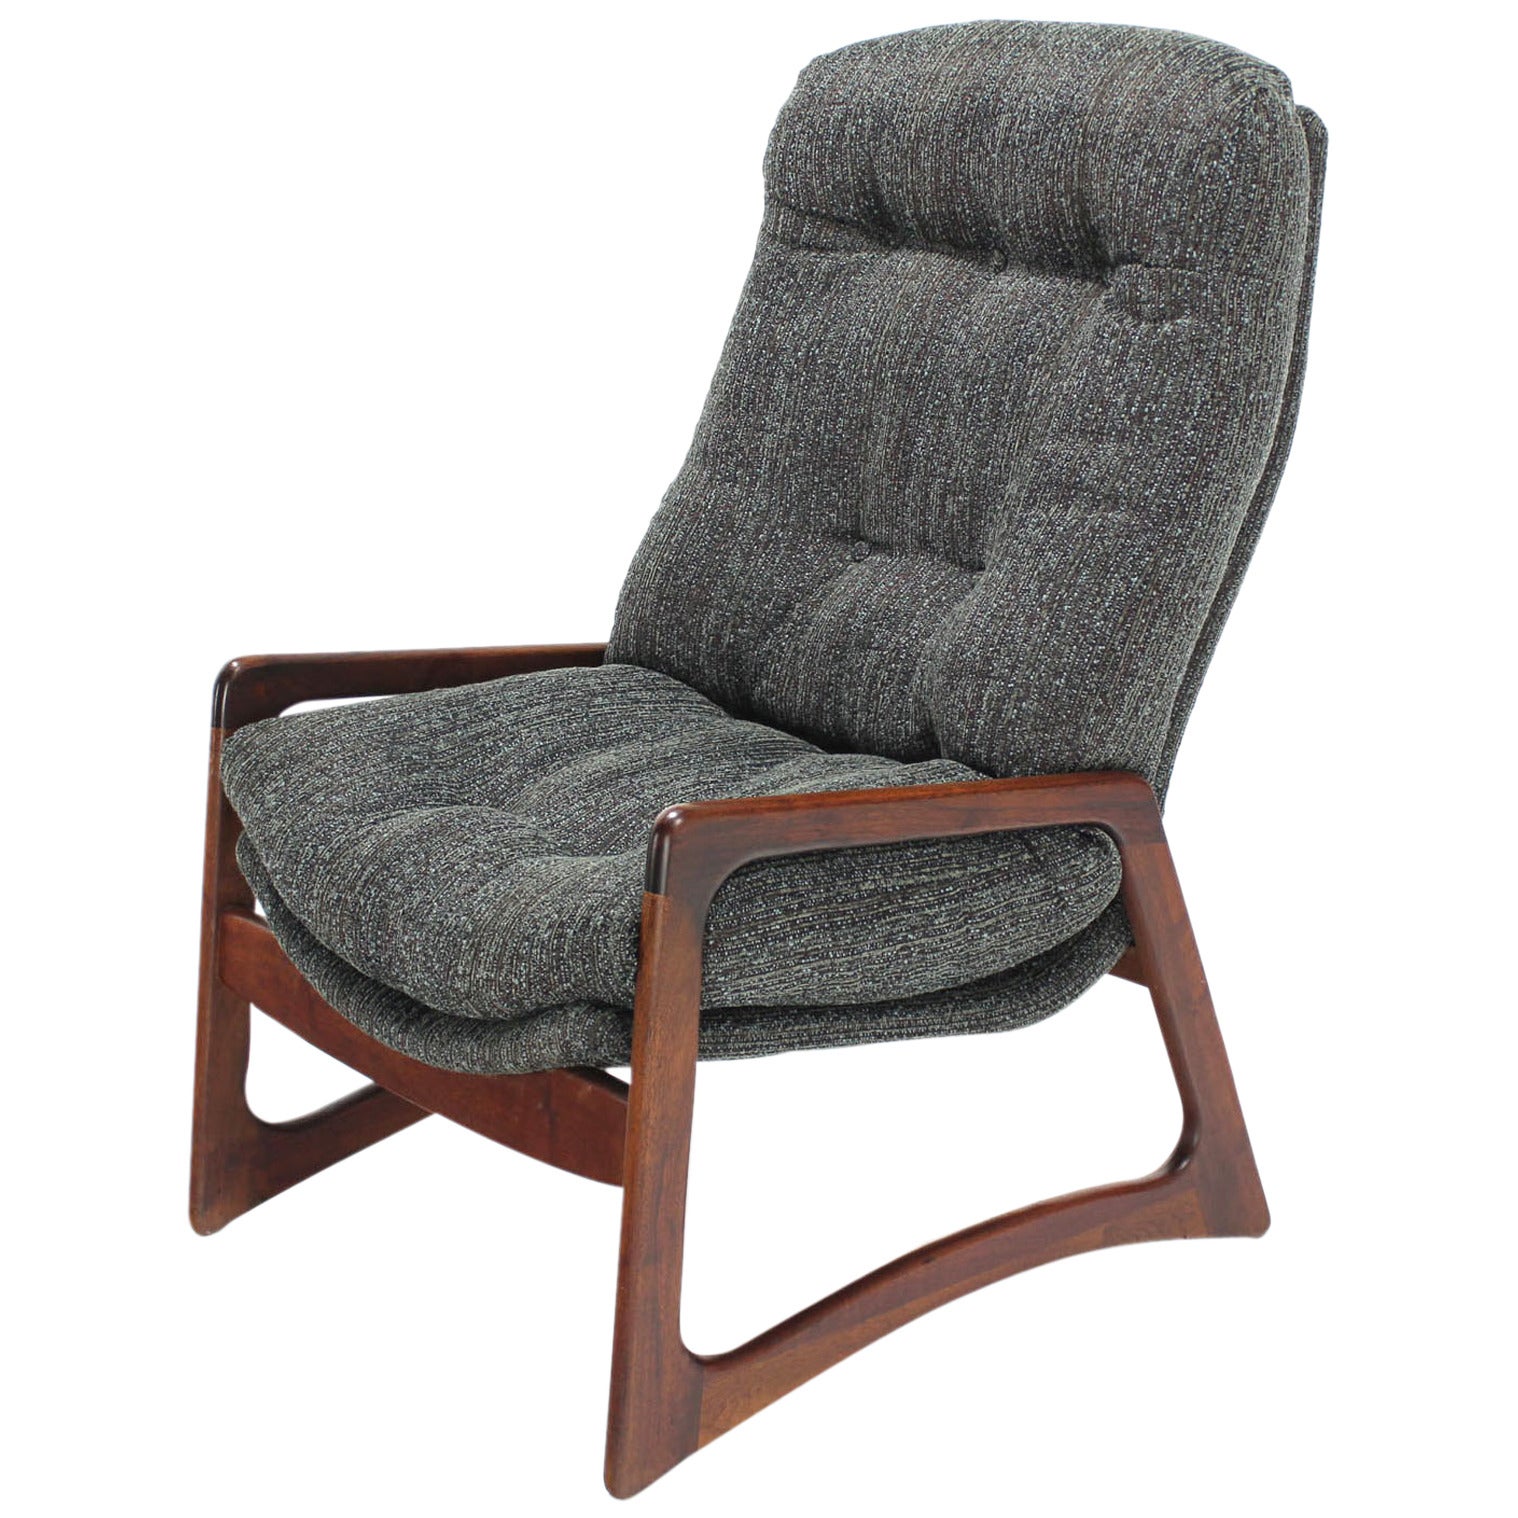 Adrian Pearsall Oiled Walnut Lounge Chair New Upholstery